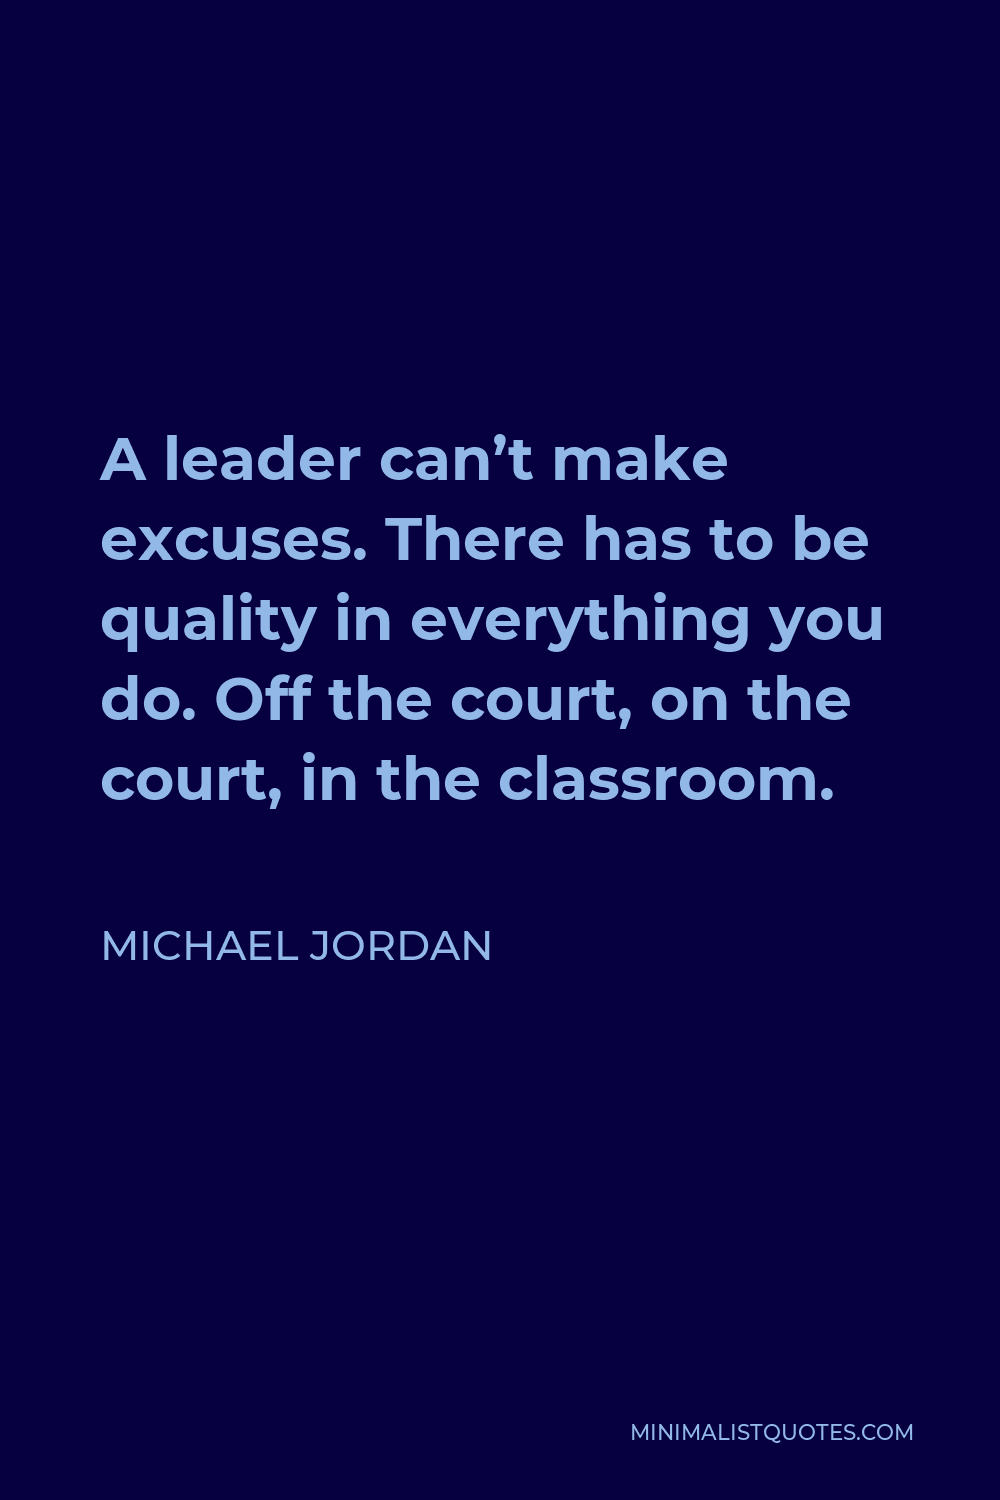 Michael Jordan Quote - A leader can’t make excuses. There has to be quality in everything you do. Off the court, on the court, in the classroom.